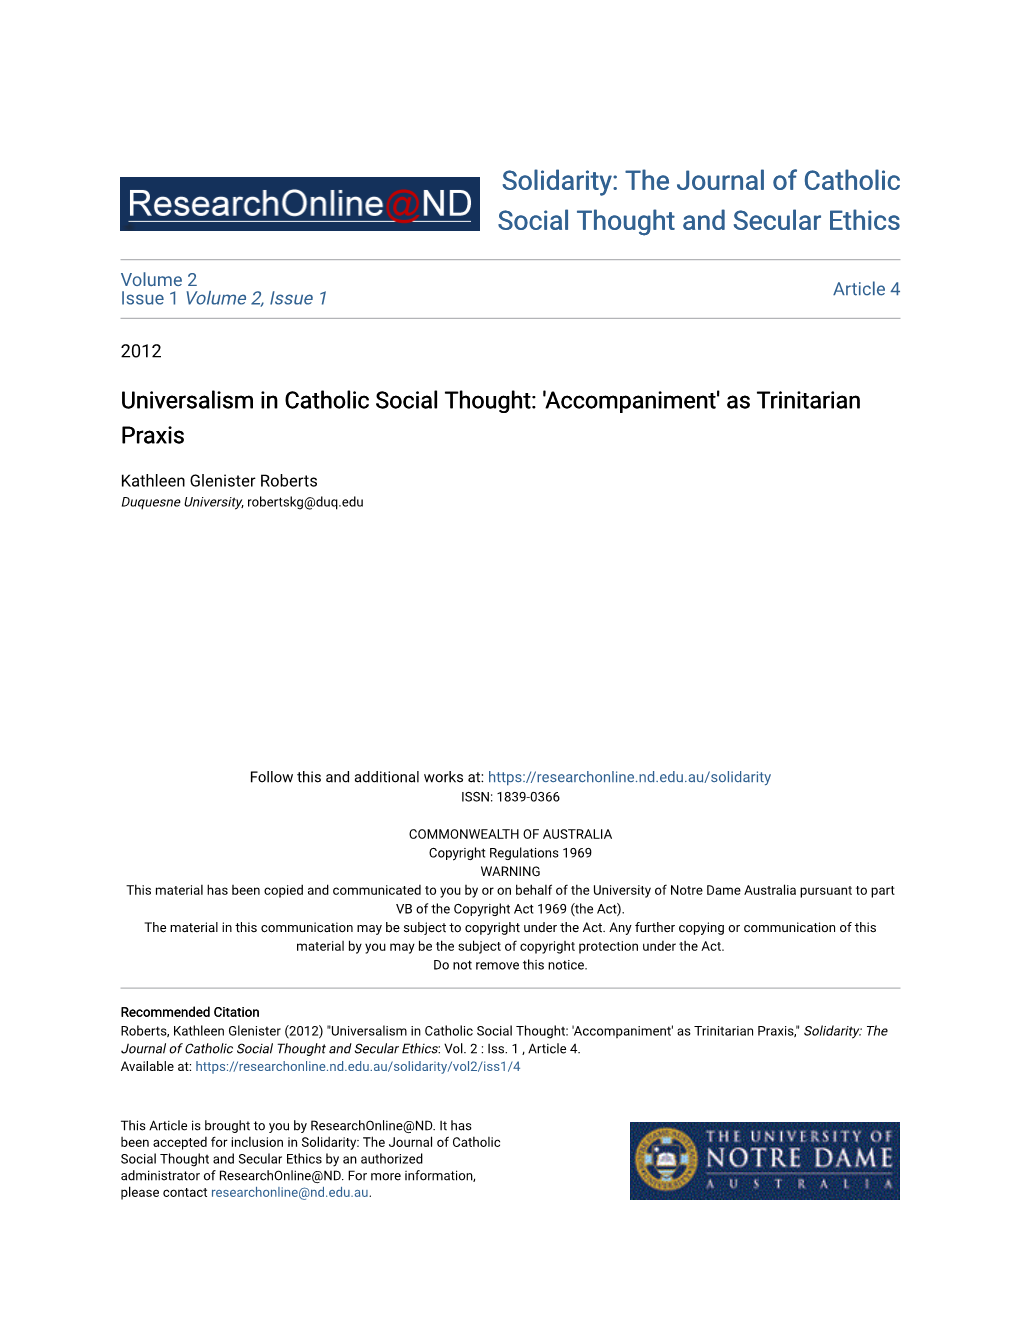 Universalism in Catholic Social Thought: 'Accompaniment' As Trinitarian Praxis